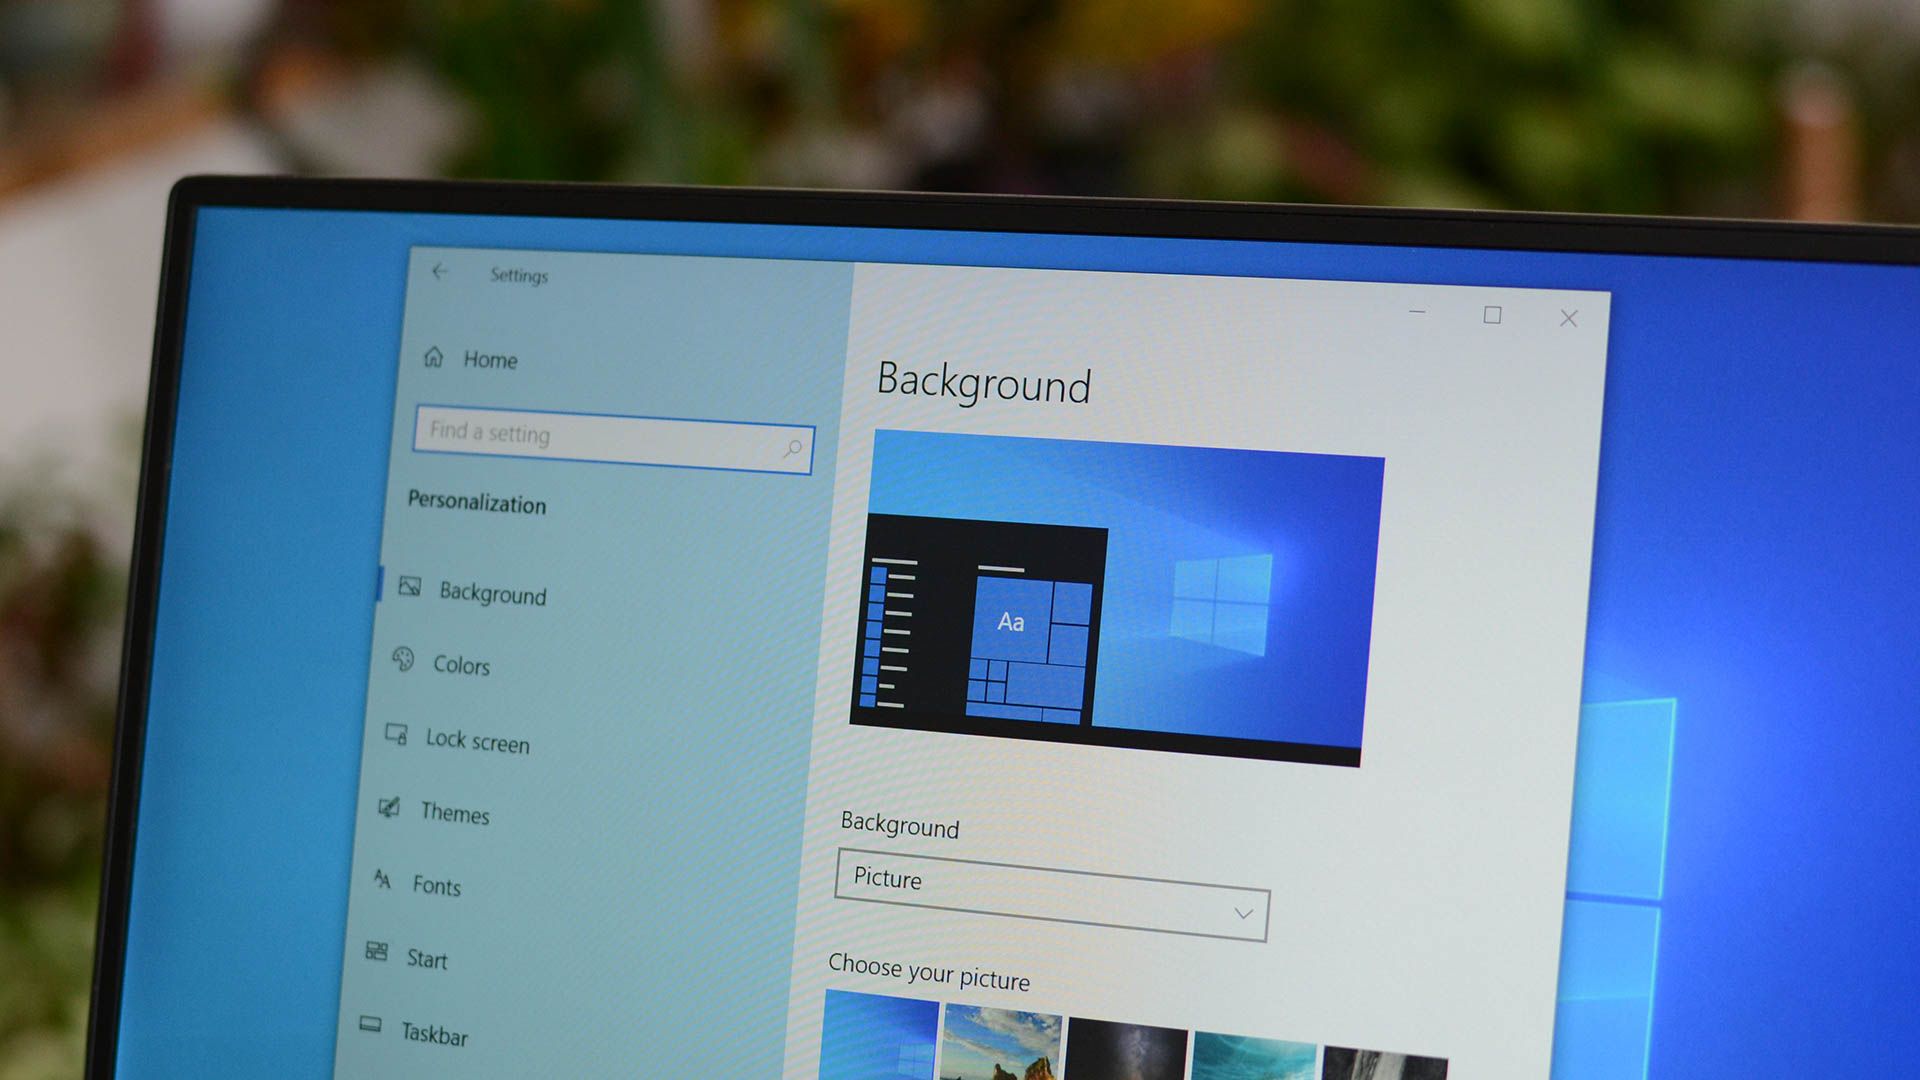 How to Disable Bing in the Windows 10 Start Menu